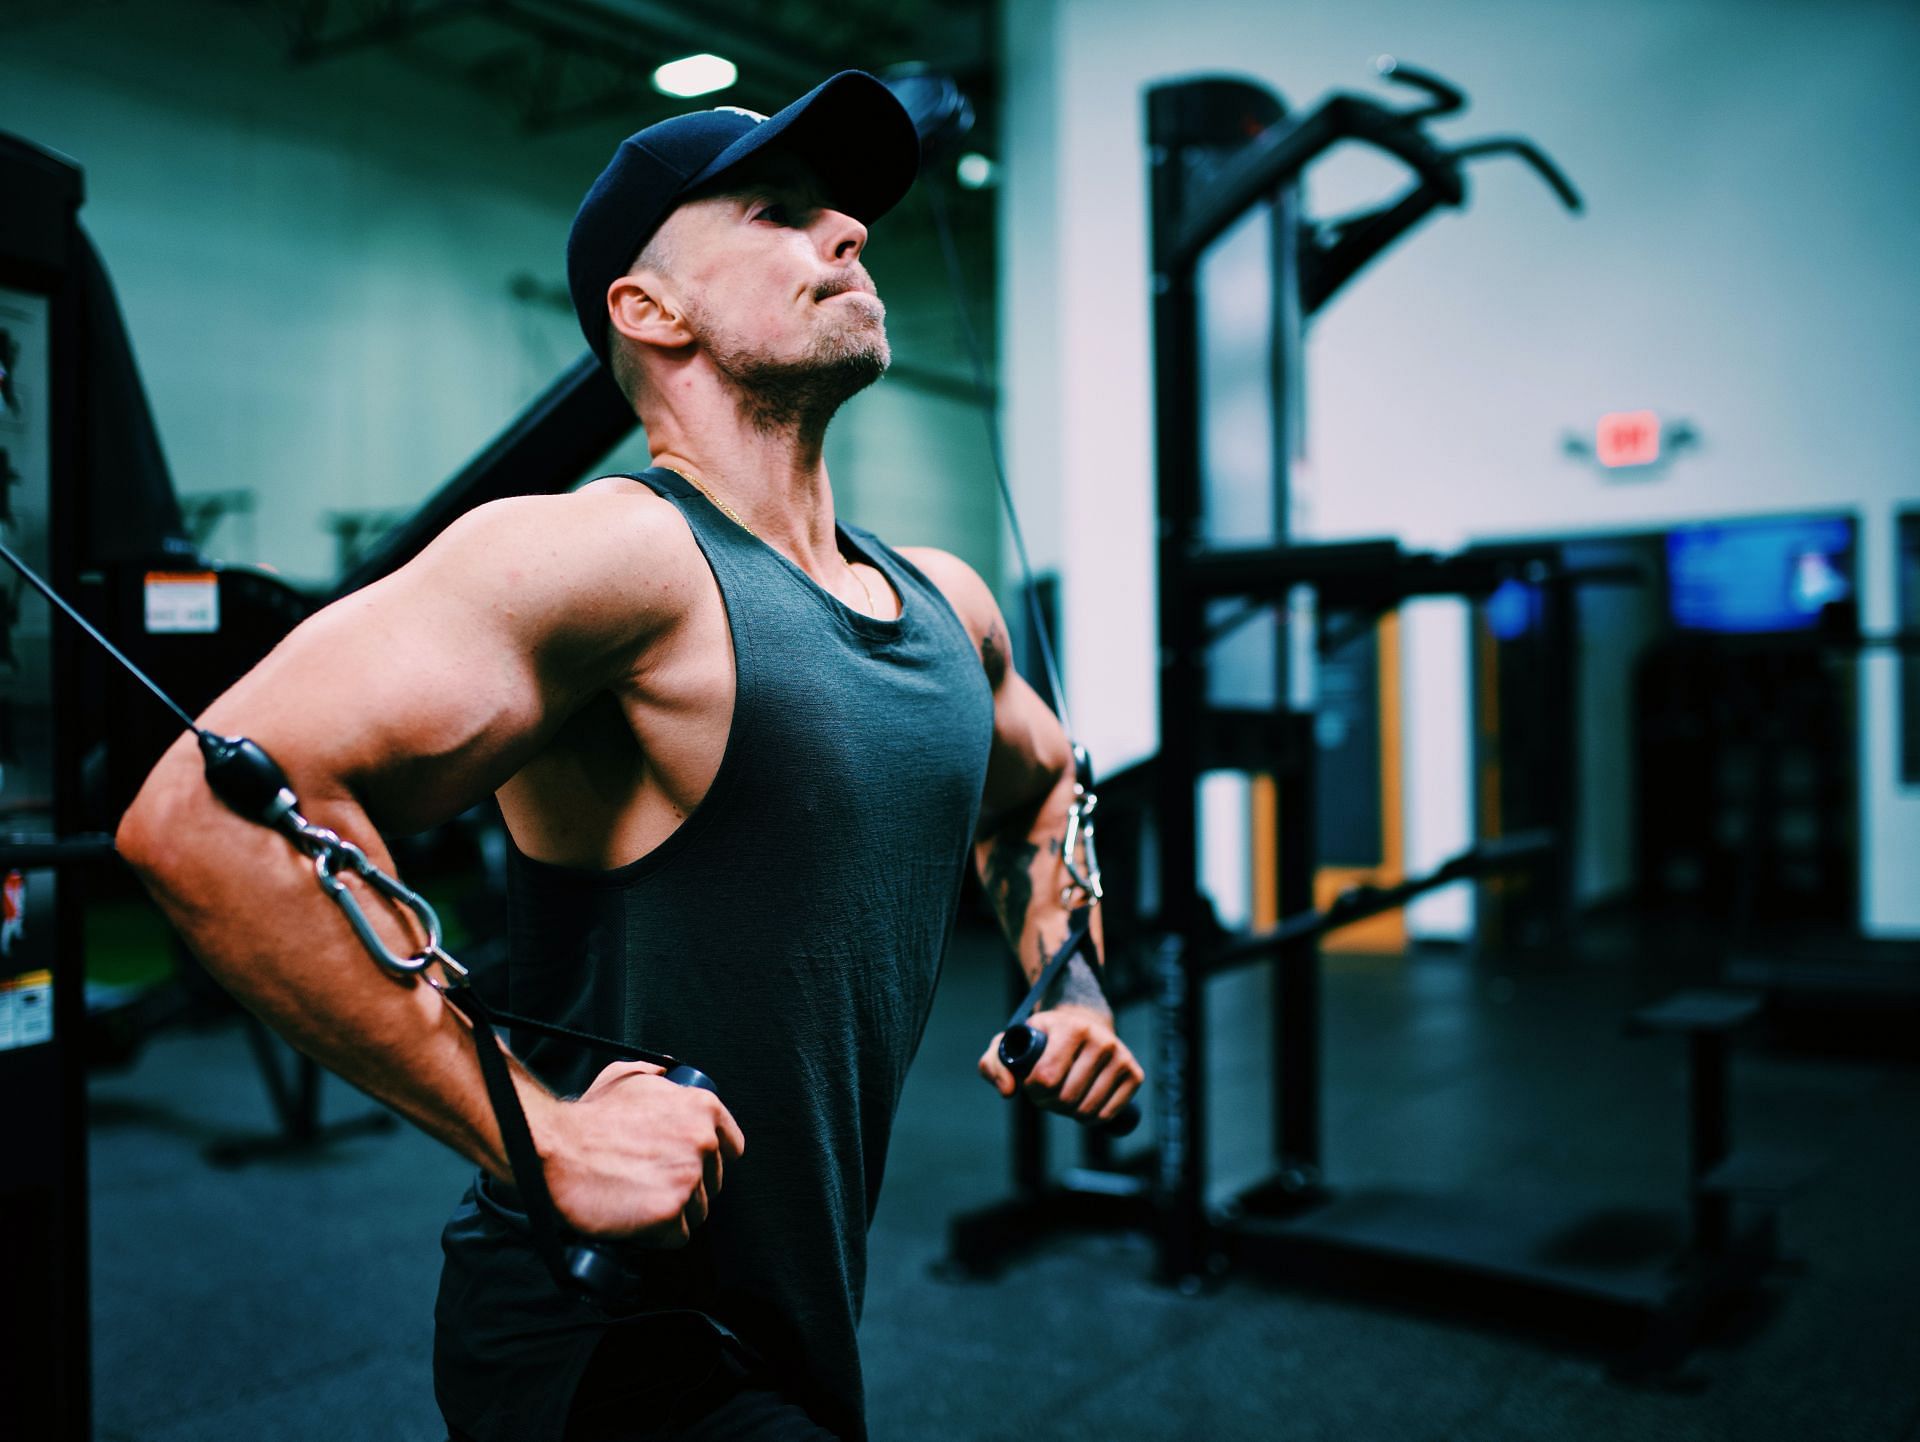 Want to build bigger chest muscles? Try these six effective chest exercises. (Image via Unsplash / Gordon Cowie)